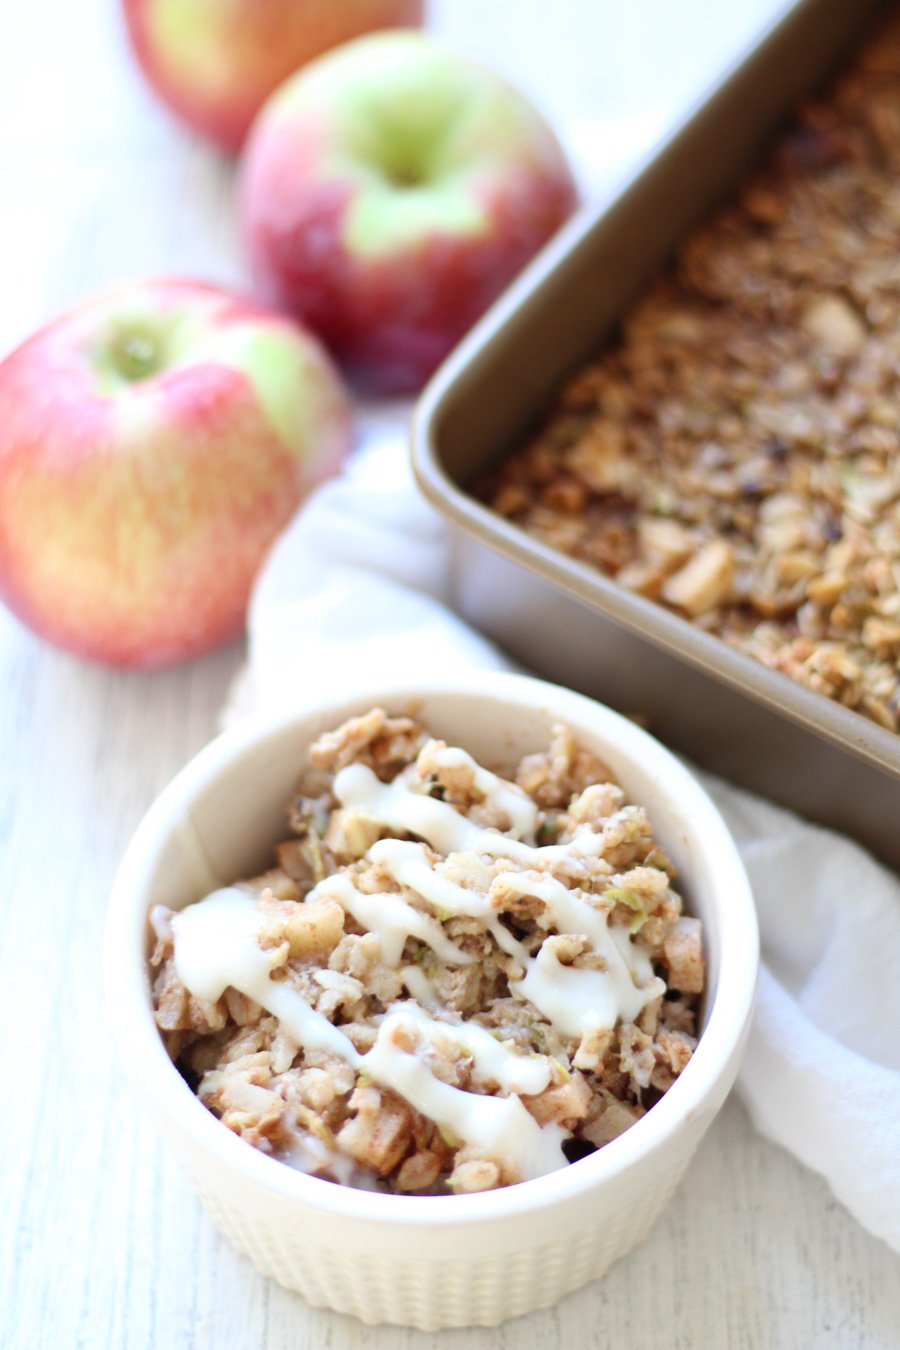 zucchini apple baked oatmeal via toast & thyme & 24 more make-ahead meals via playswellwithbutter | with just a little planning in advance & a little organization over the weekend, you can set yourself up with a week’s worth of delicious meals that will come together faster than you could order pizza or pick up chipotle.